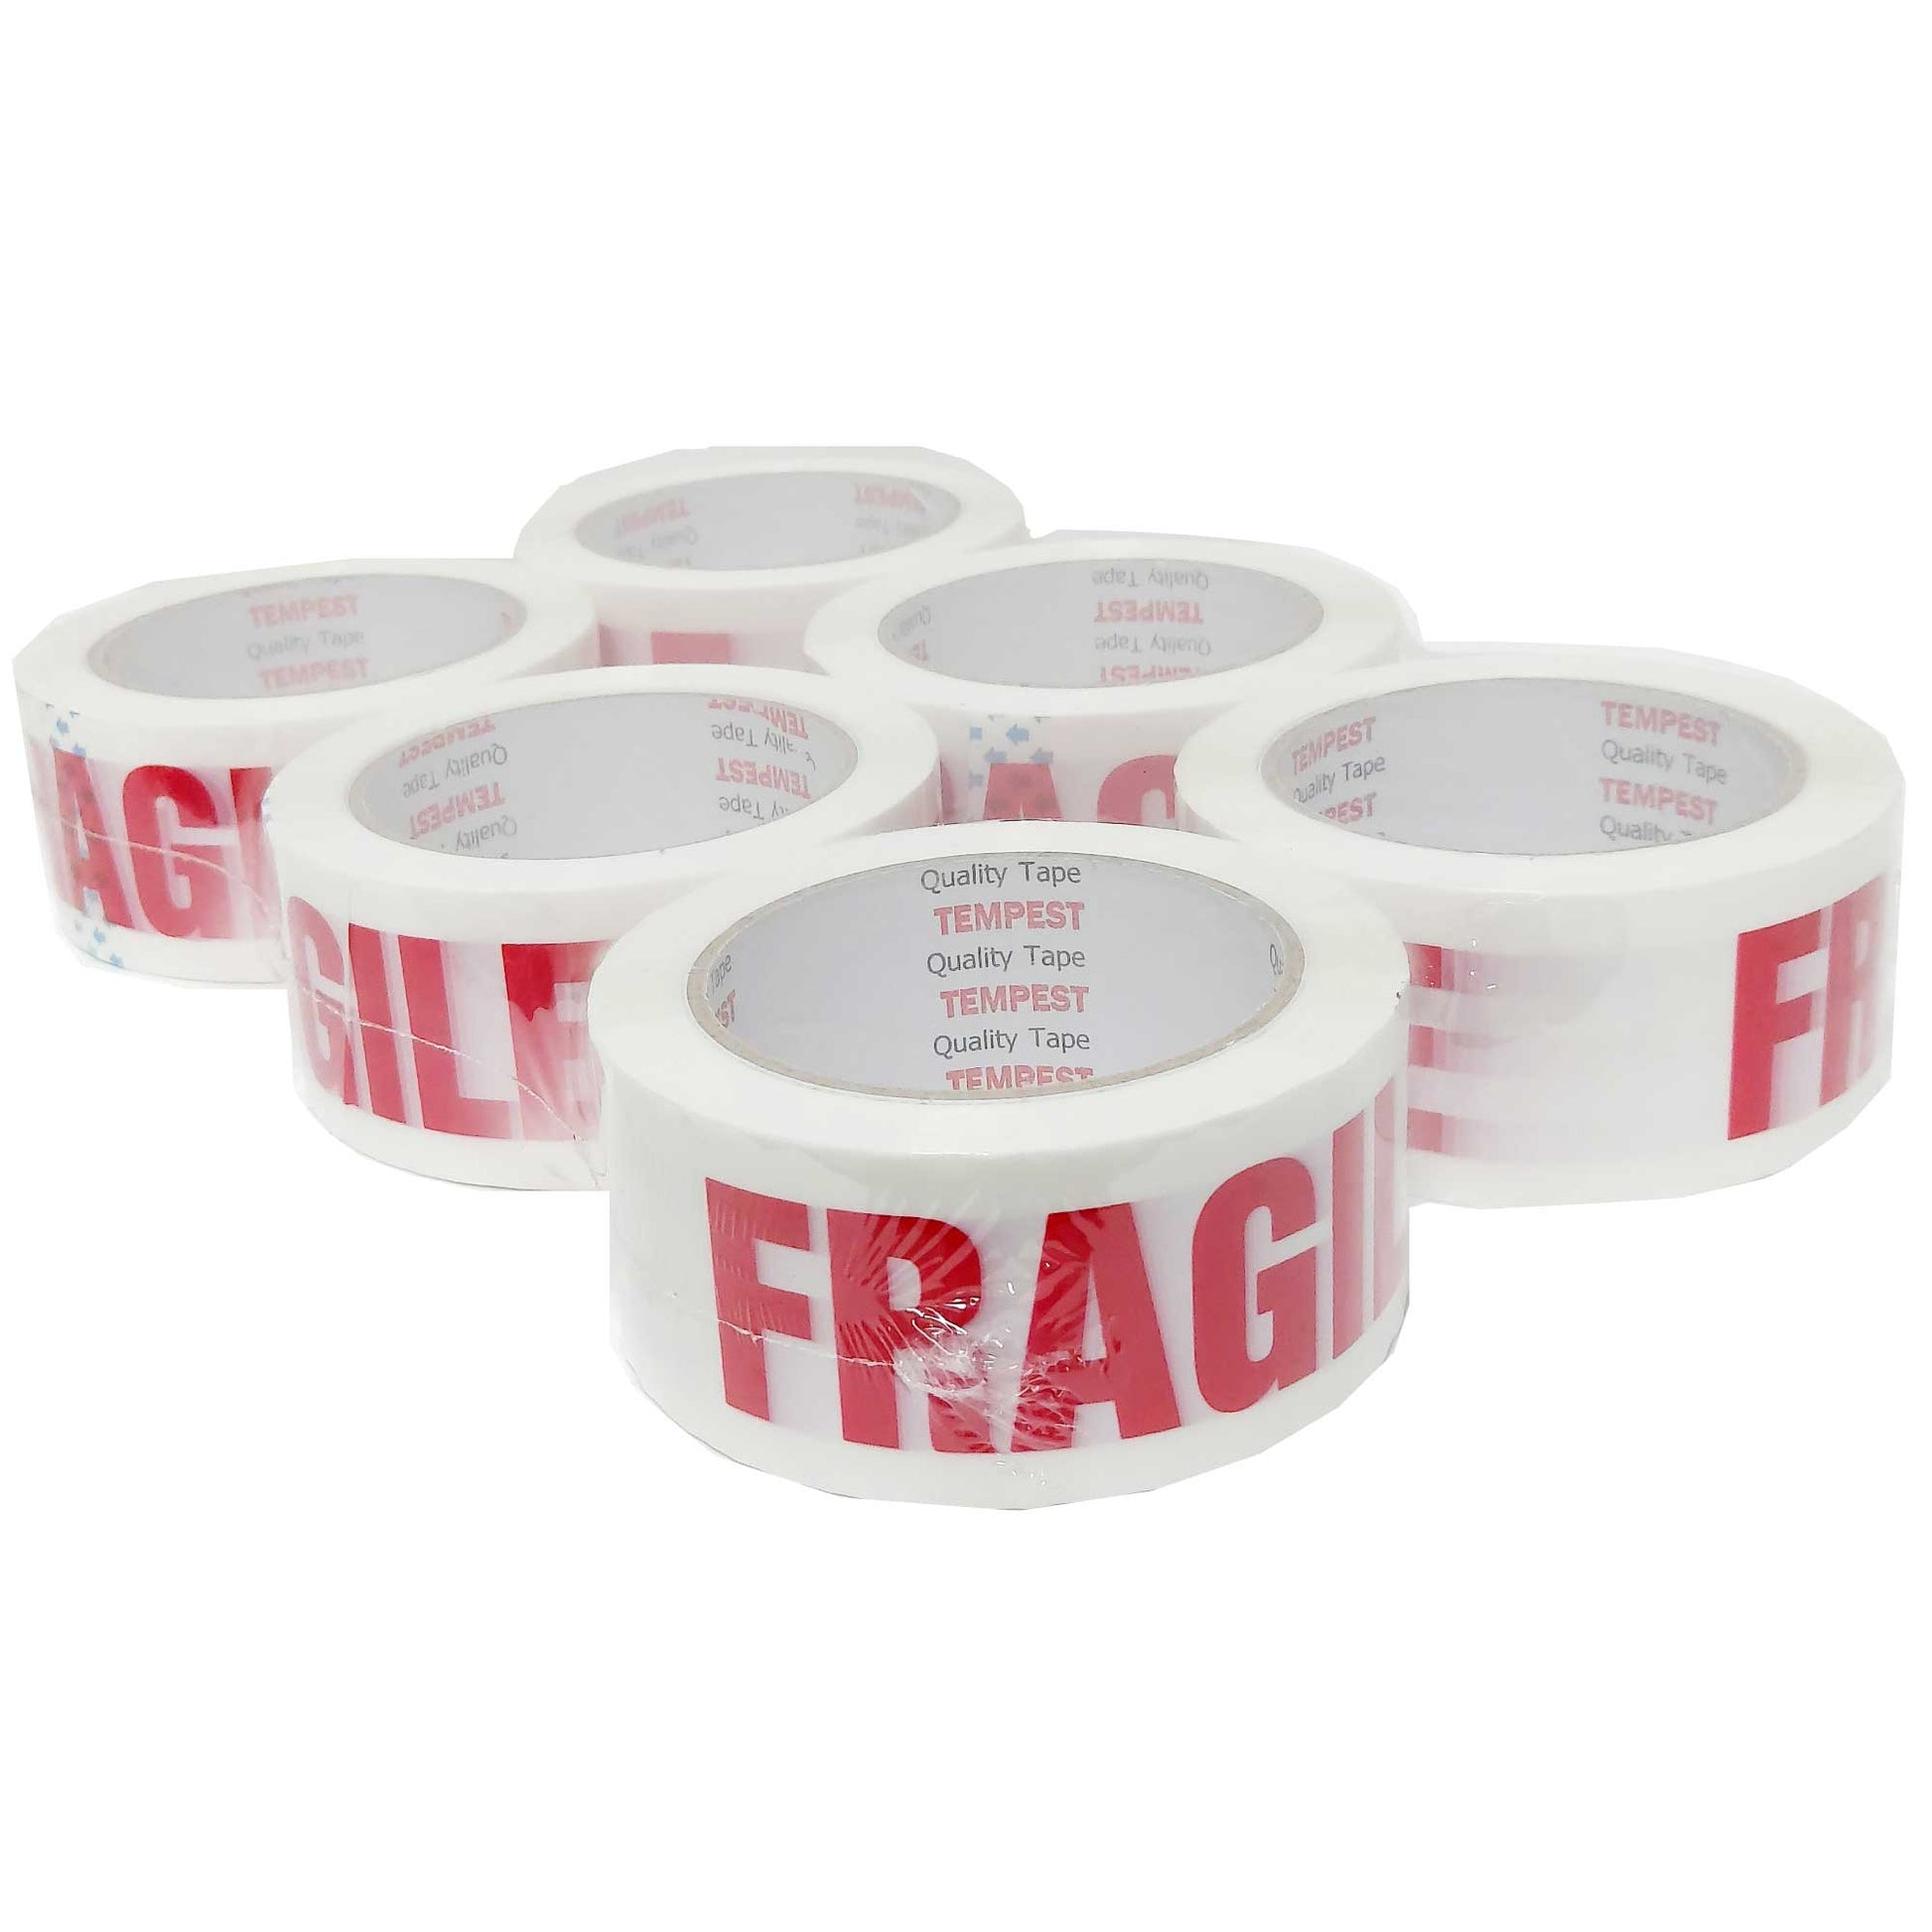 6x Fragile Packing Tape 48mmx75m Long Rolls Red White Packaging Adhesive Label